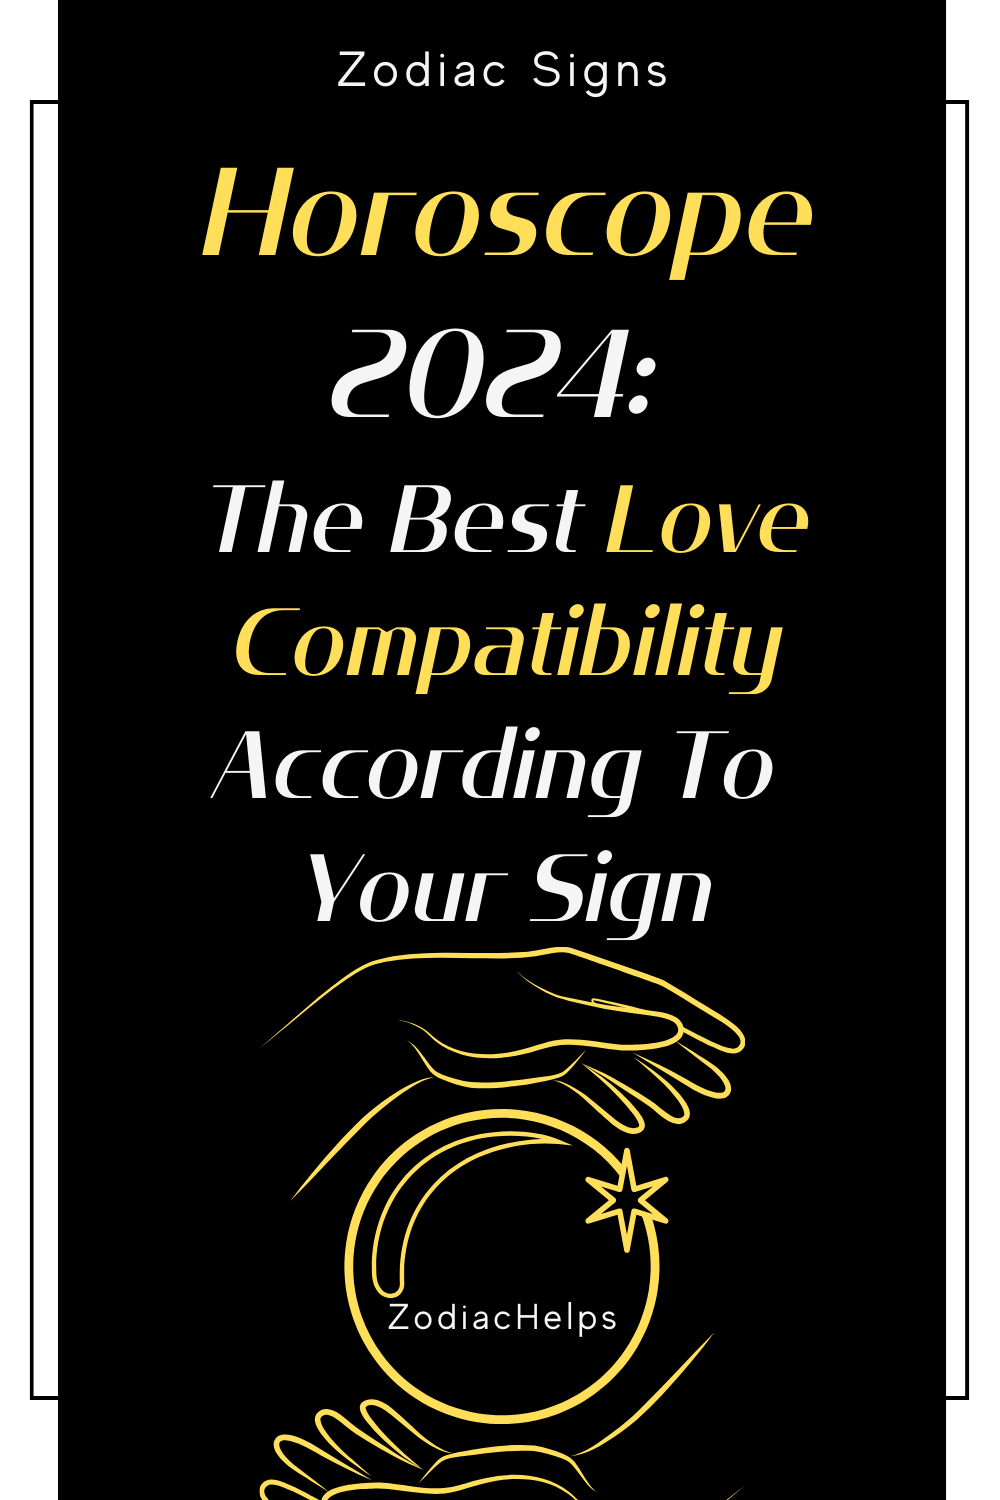 Horoscope 2024: The Best Love Compatibility According To Your Sign